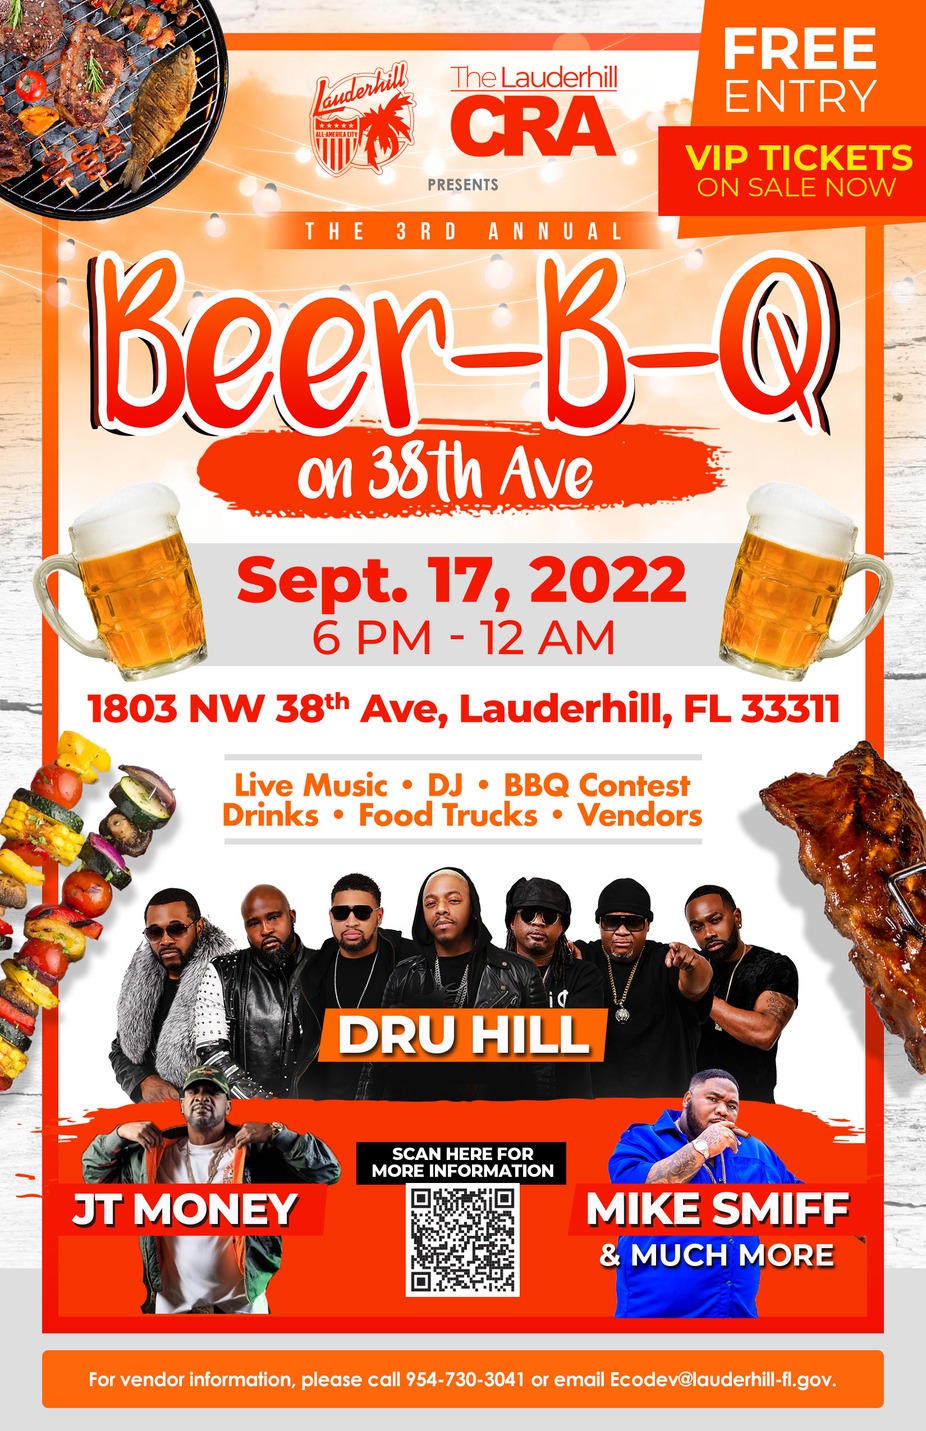 Beer BBQ Concert with Dru Hill event photo